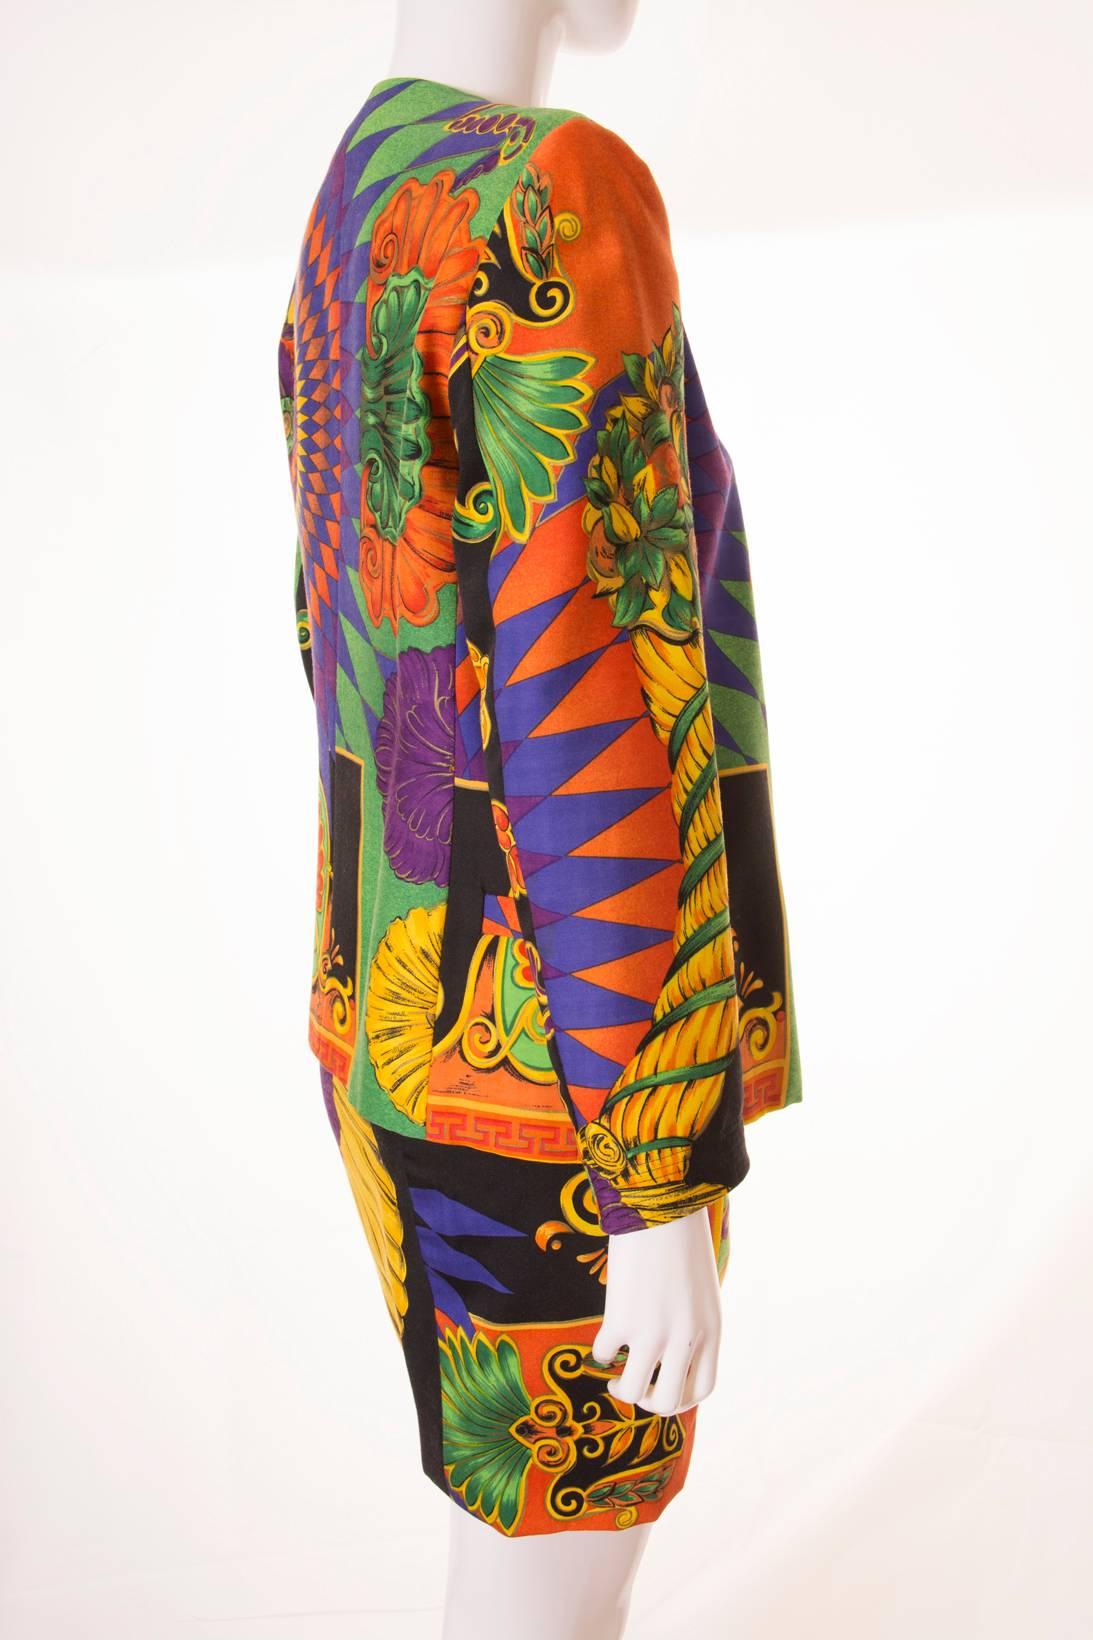 This suit is a beautiful example of Gianni Versace's skirt. The print is vibrant and incredible with big seashells and baroque flourishes.  Bold colourway in rich hues of purple, orange, gold and emerald green. Quality beyond compare. The one thing